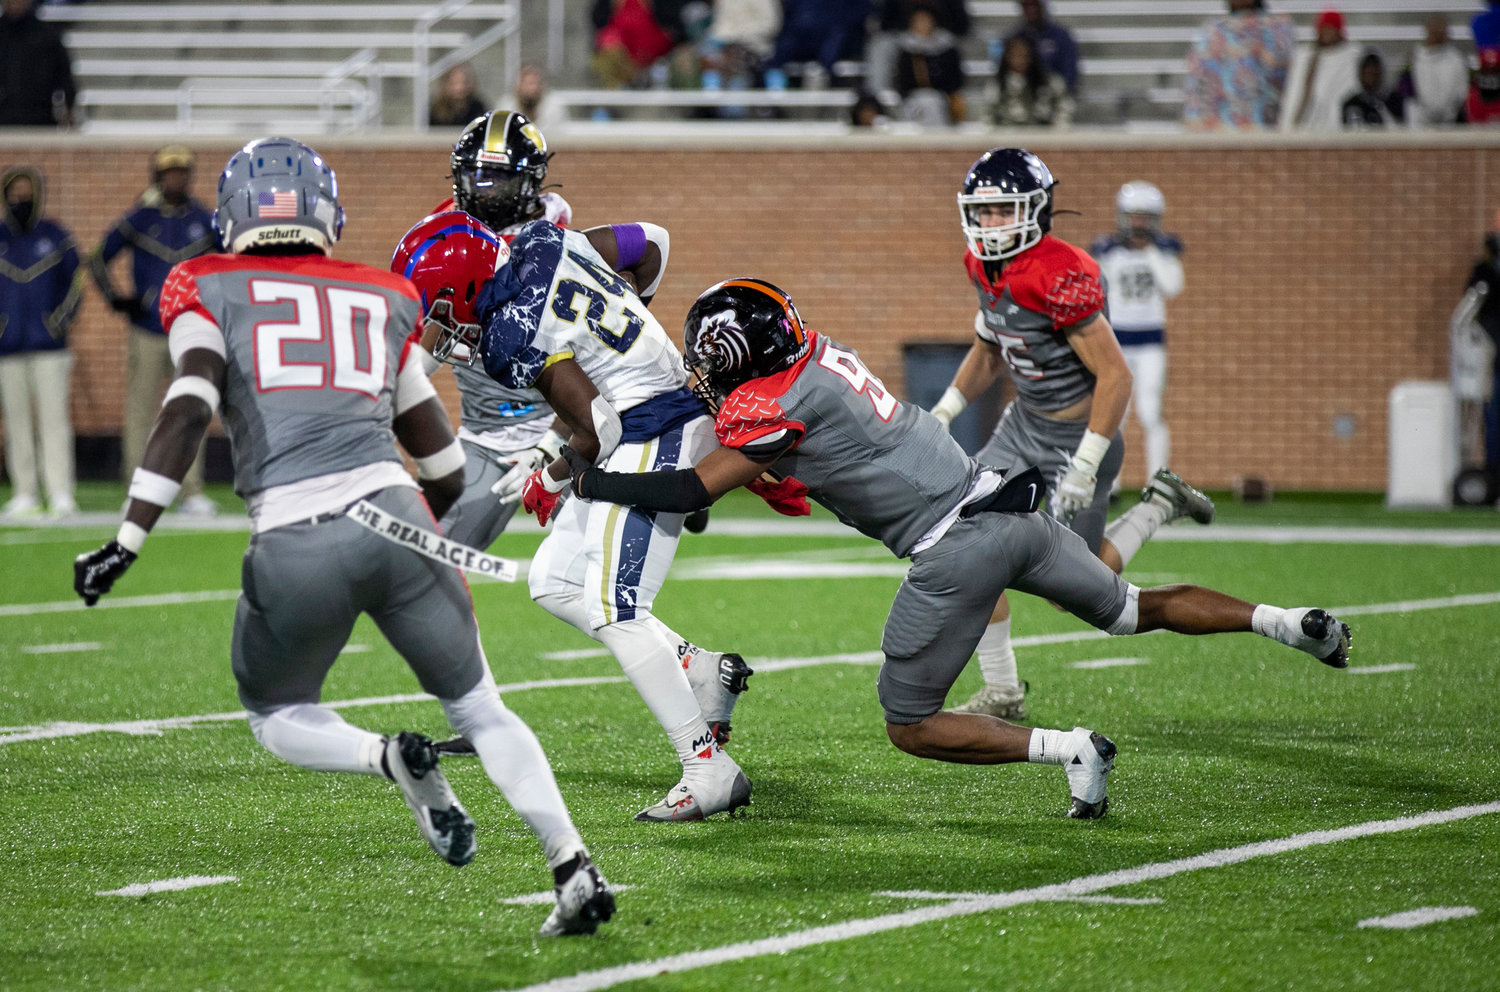 Baldwin County’s DJ Jackson pulls down a North All-Star ballcarrier during Friday’s North-South All-Star game at the University of South Alabama. Jackson provided a tackle to the defensive shutdown that earned a 42-7 win.